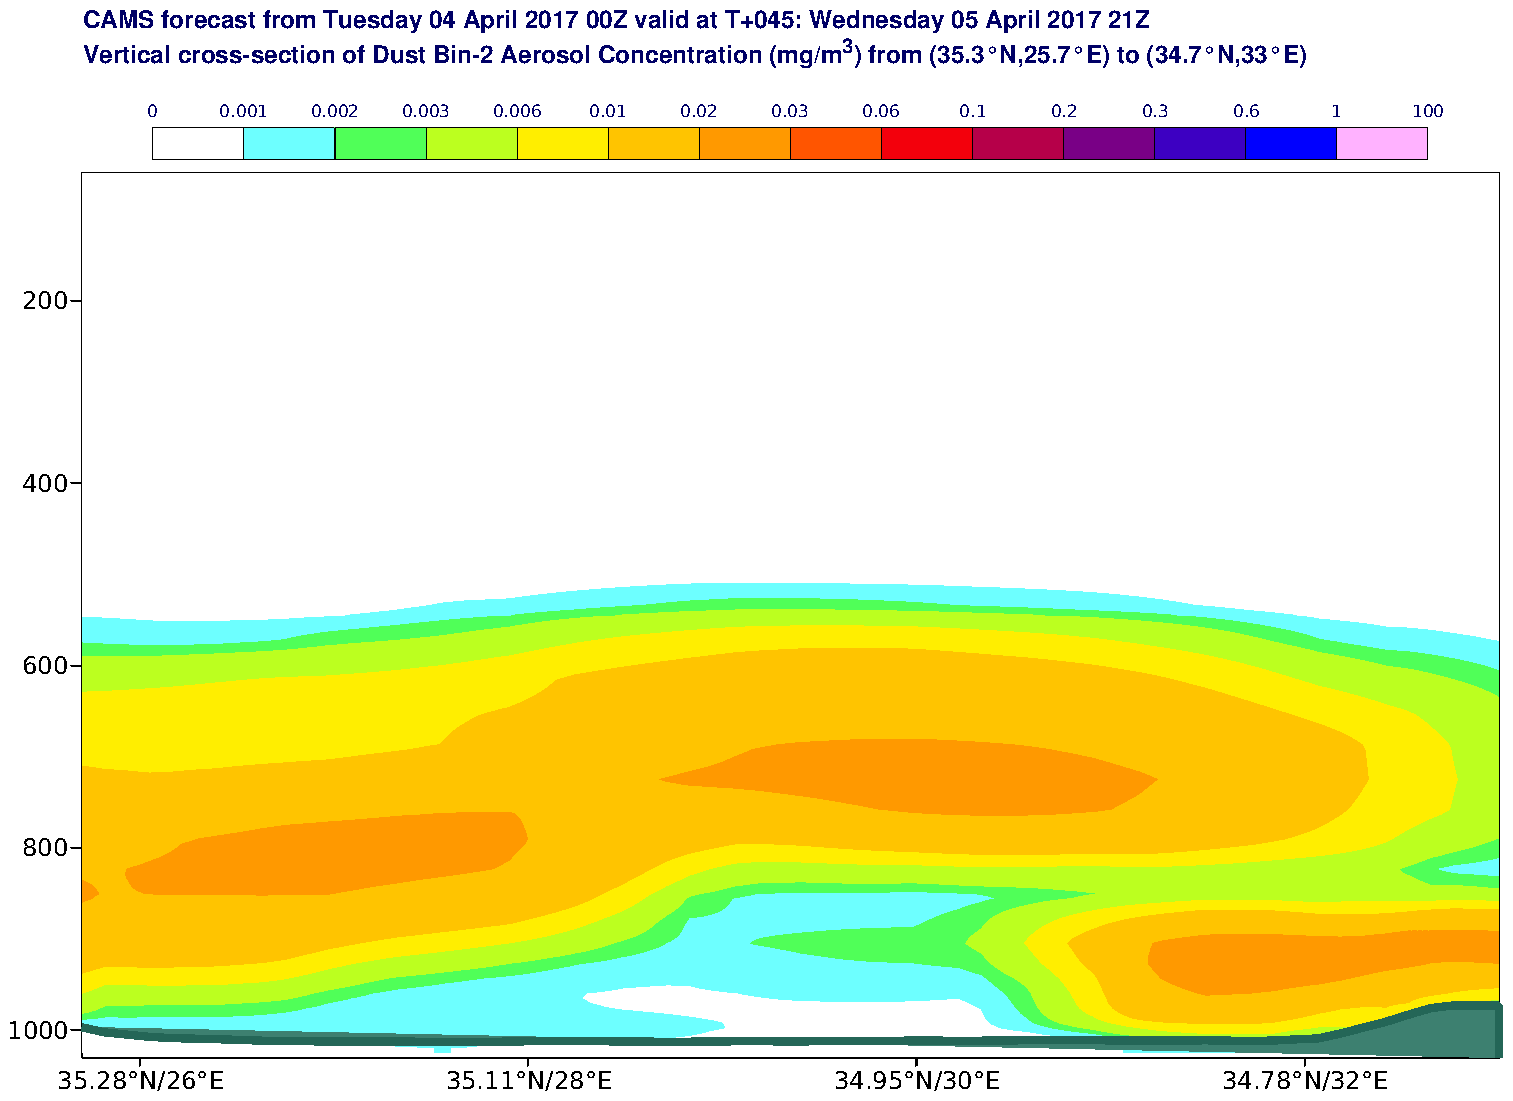 Vertical cross-section of Dust Bin-2 Aerosol Concentration (mg/m3) valid at T45 - 2017-04-05 21:00